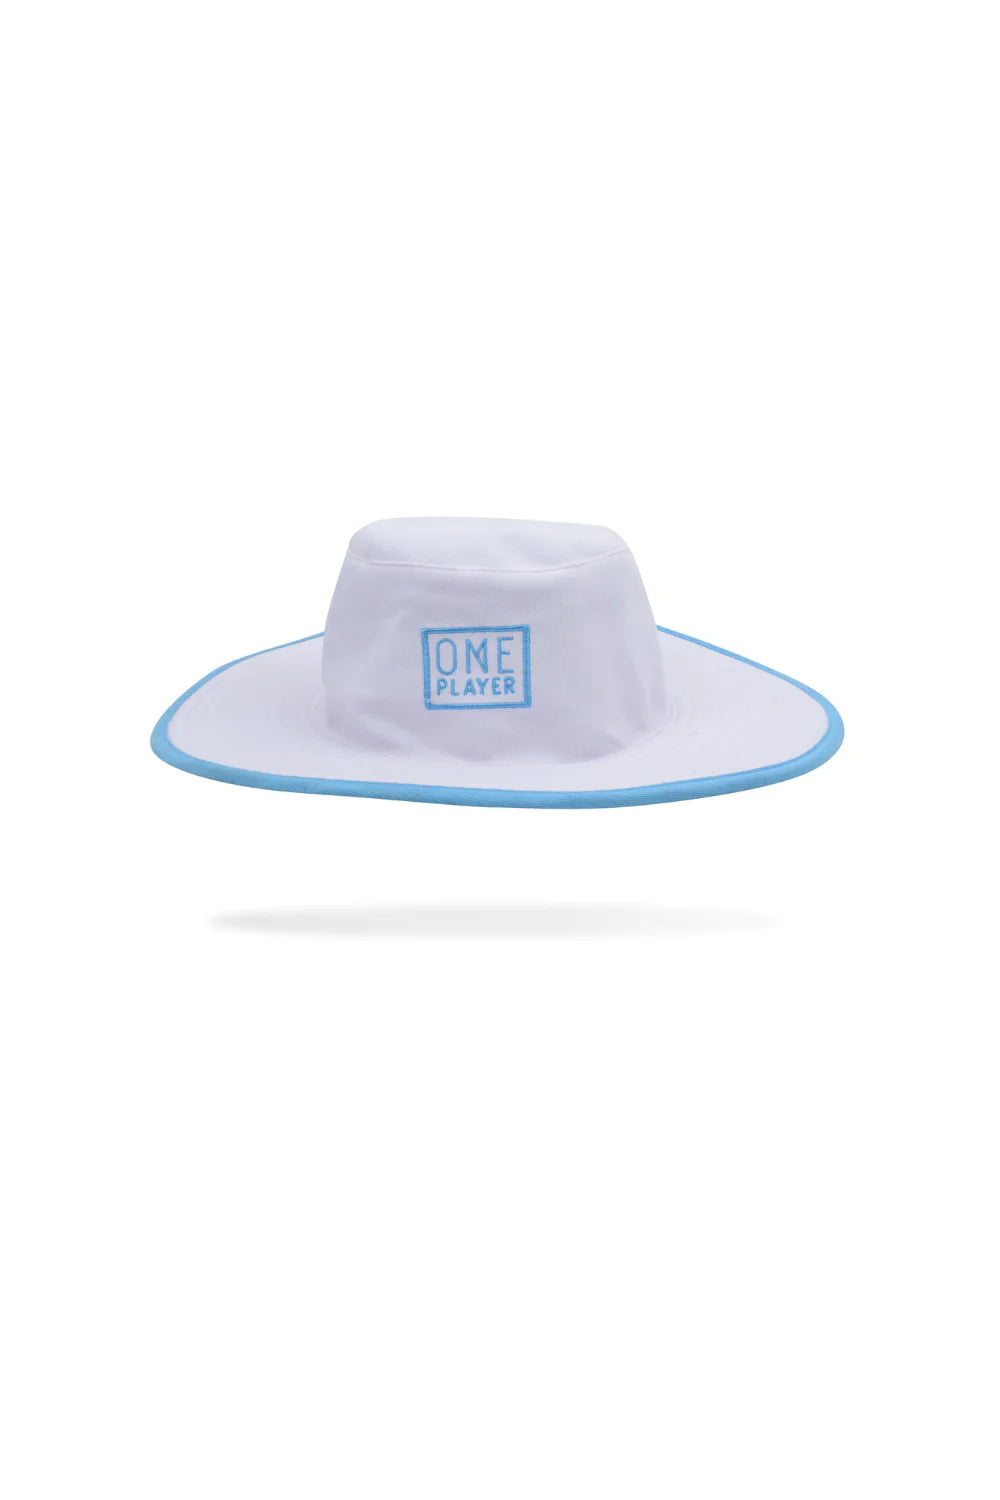 Reversible Blue & White color  Round Hat by One Player